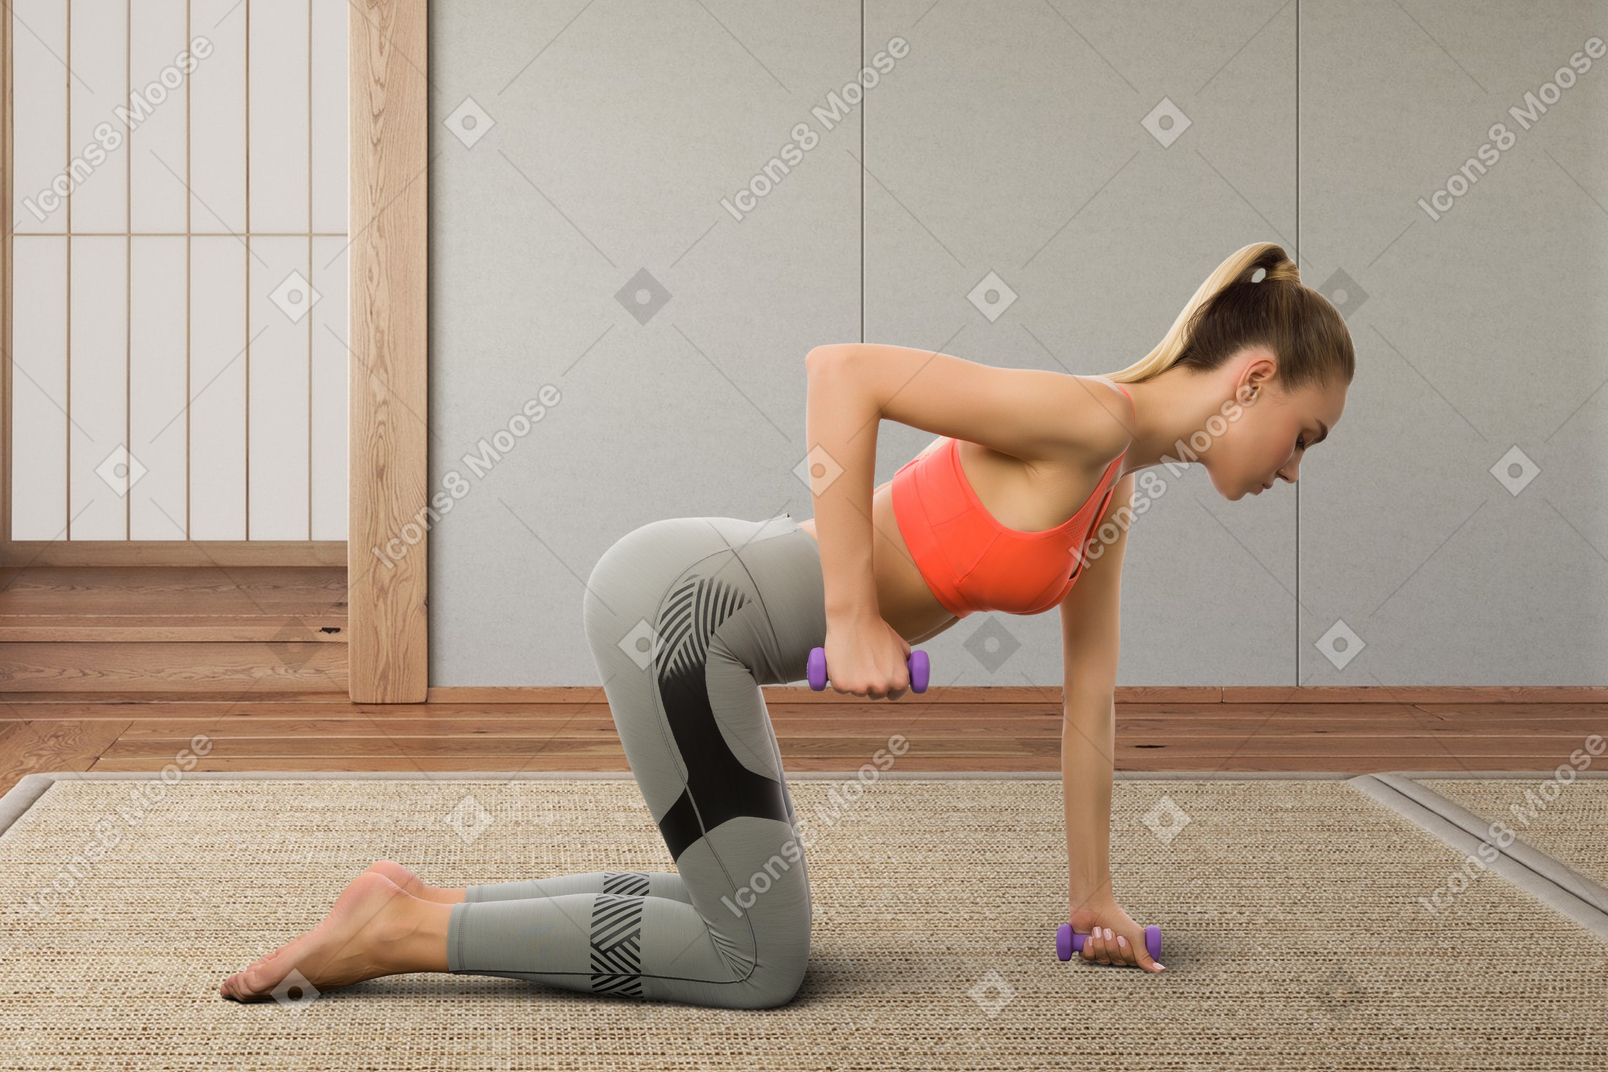 Woman in a sports bra top and leggings training with dumbbells